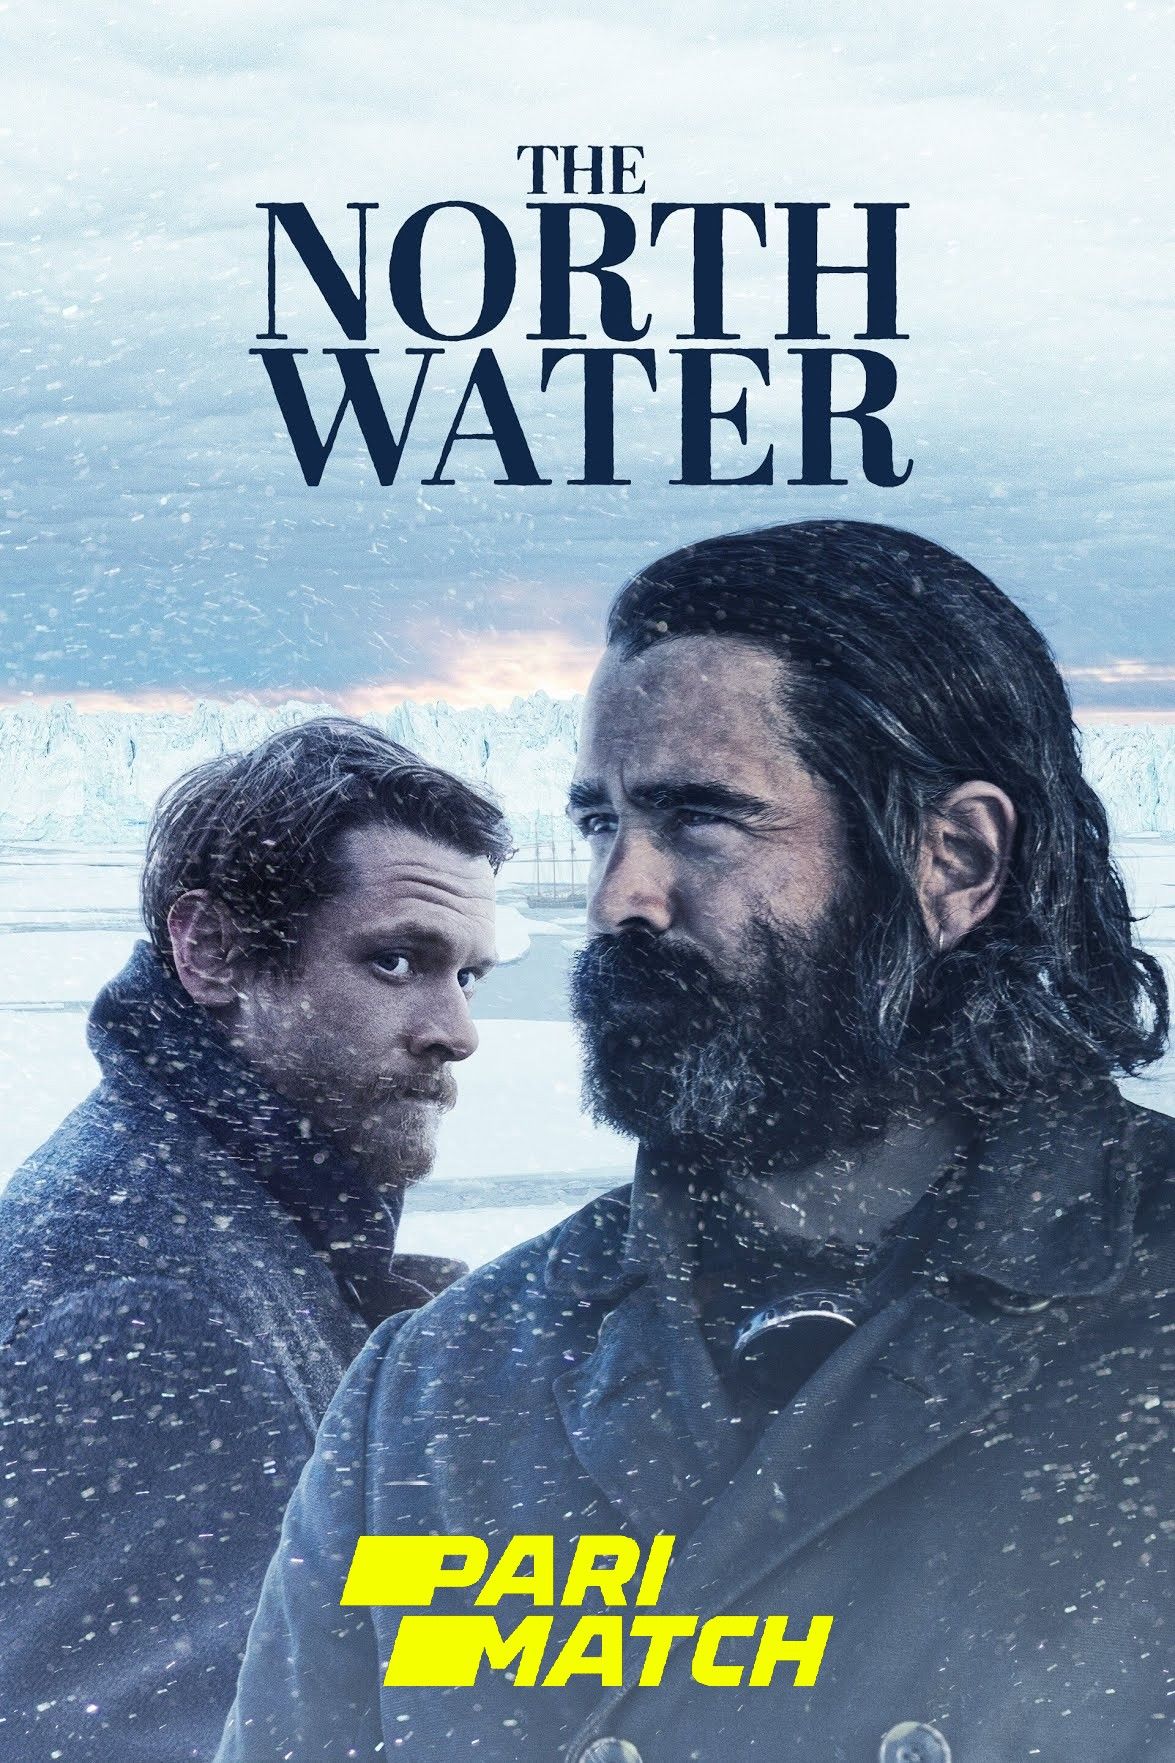 The North Water: Season 1 (2021) (Episode 3) Hindi (Voice Over) Dubbed TV Series download full movie